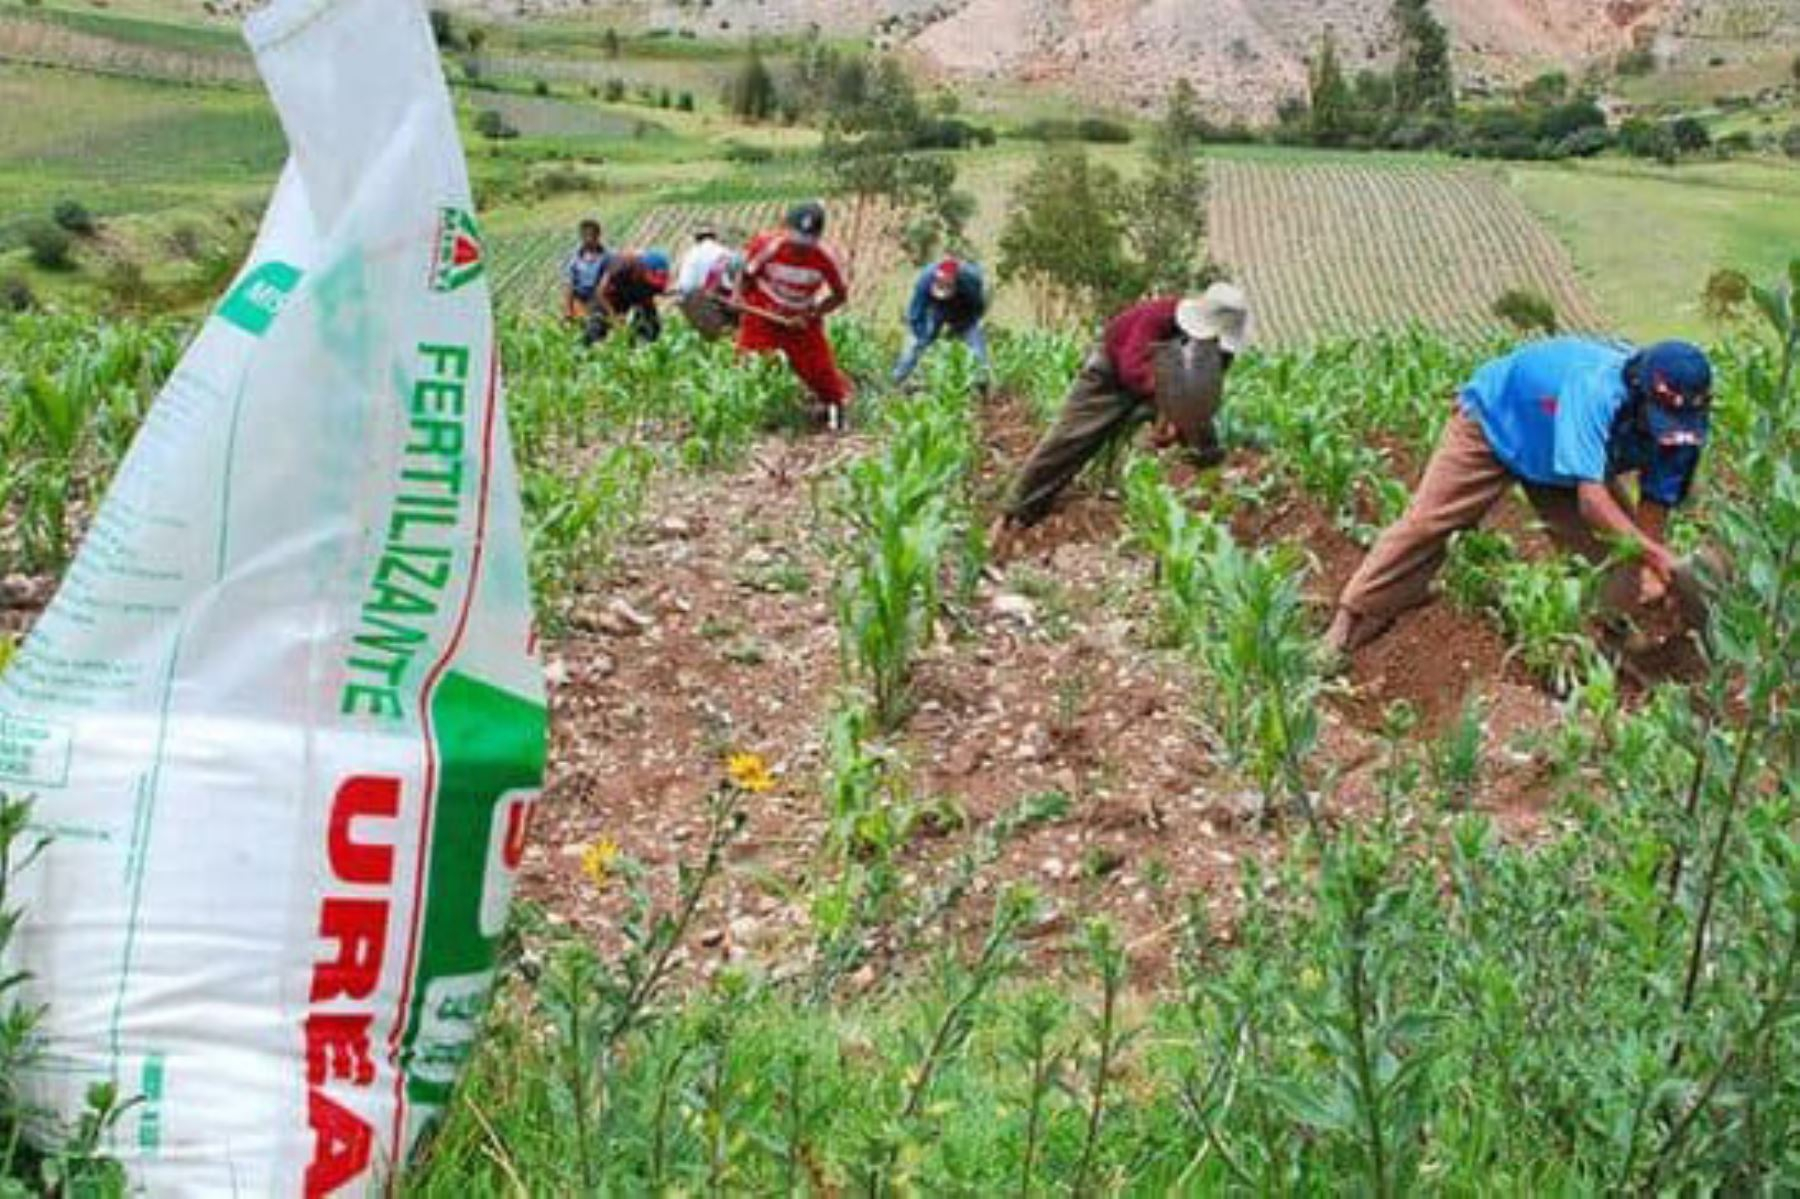 Direcagro evaluates suing Agro Rural for more than US$ 9 million for canceling the purchase of urea